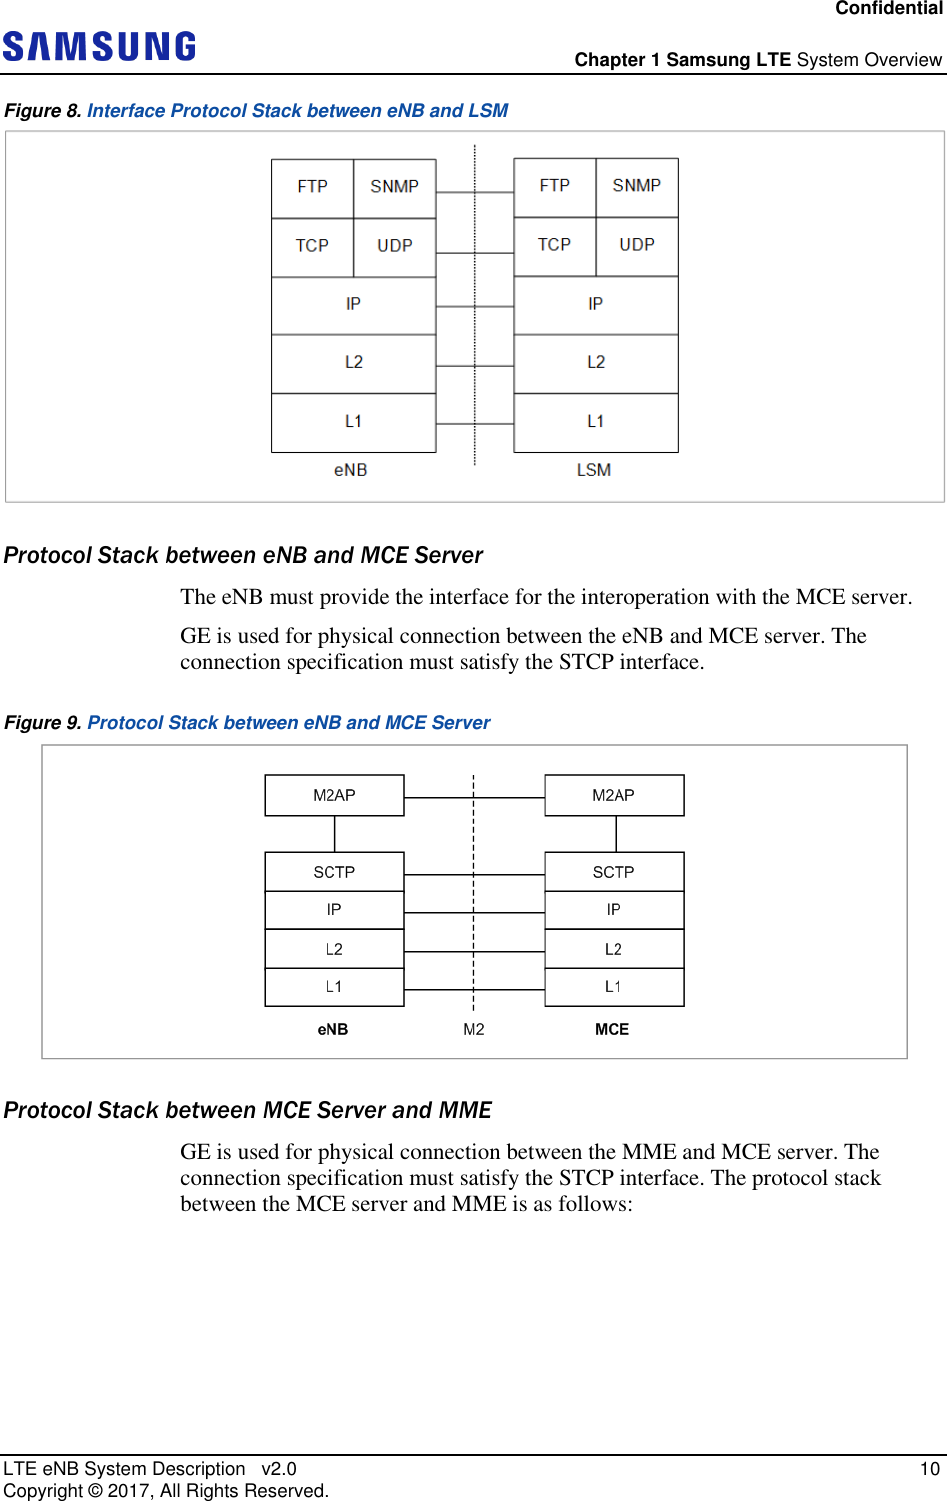 Confidential  Chapter 1 Samsung LTE System Overview LTE eNB System Description   v2.0   10 Copyright ©  2017, All Rights Reserved. Figure 8. Interface Protocol Stack between eNB and LSM  Protocol Stack between eNB and MCE Server The eNB must provide the interface for the interoperation with the MCE server. GE is used for physical connection between the eNB and MCE server. The connection specification must satisfy the STCP interface. Figure 9. Protocol Stack between eNB and MCE Server  Protocol Stack between MCE Server and MME GE is used for physical connection between the MME and MCE server. The connection specification must satisfy the STCP interface. The protocol stack between the MCE server and MME is as follows: 